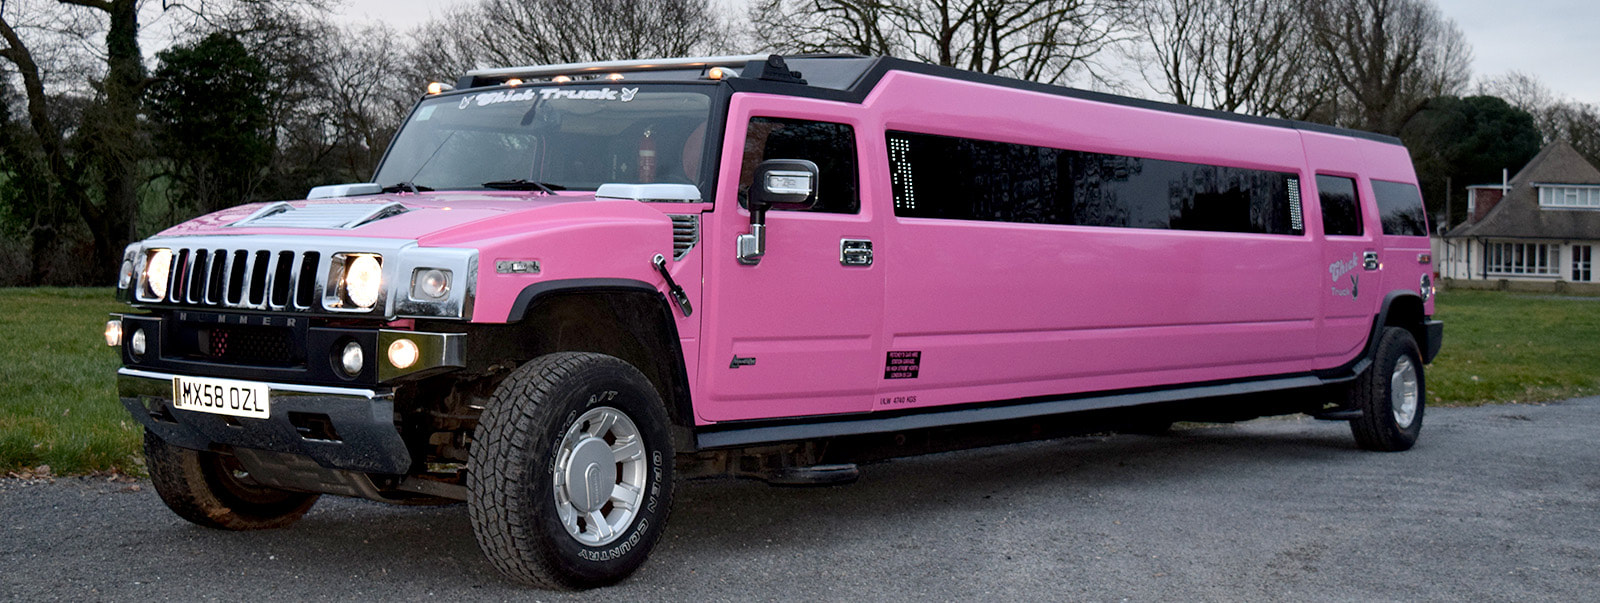 Pink Hummer Limo Hire Wigan